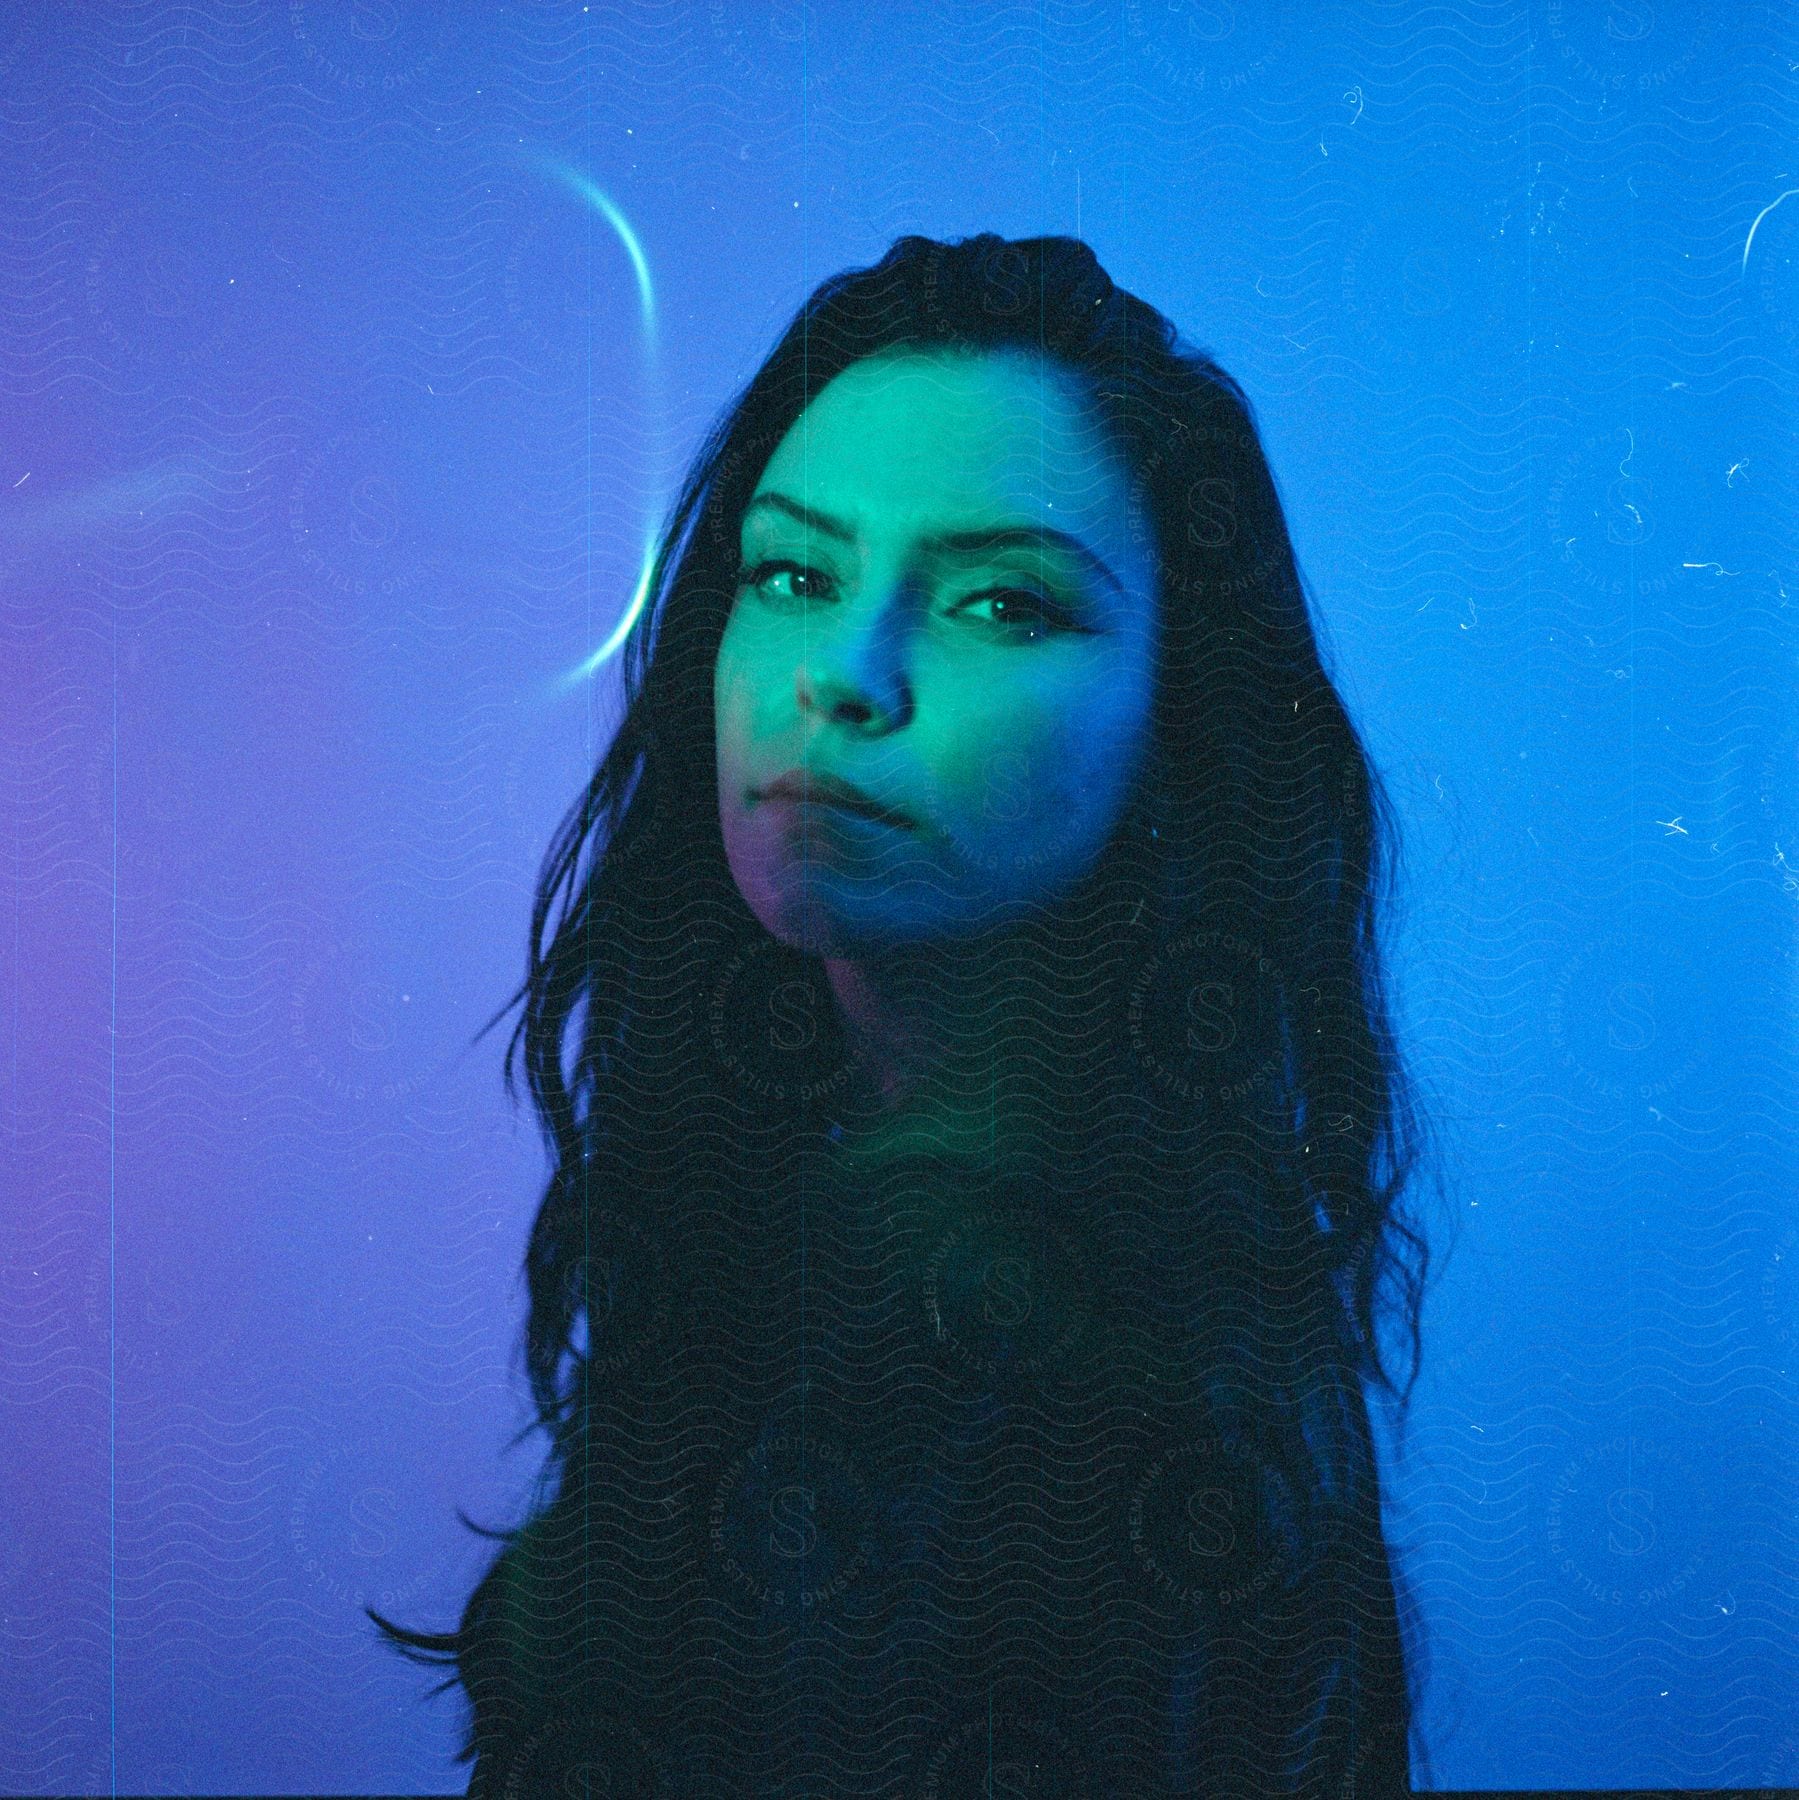 A woman with long hair stands in front of a blue background, bathed in blue light.